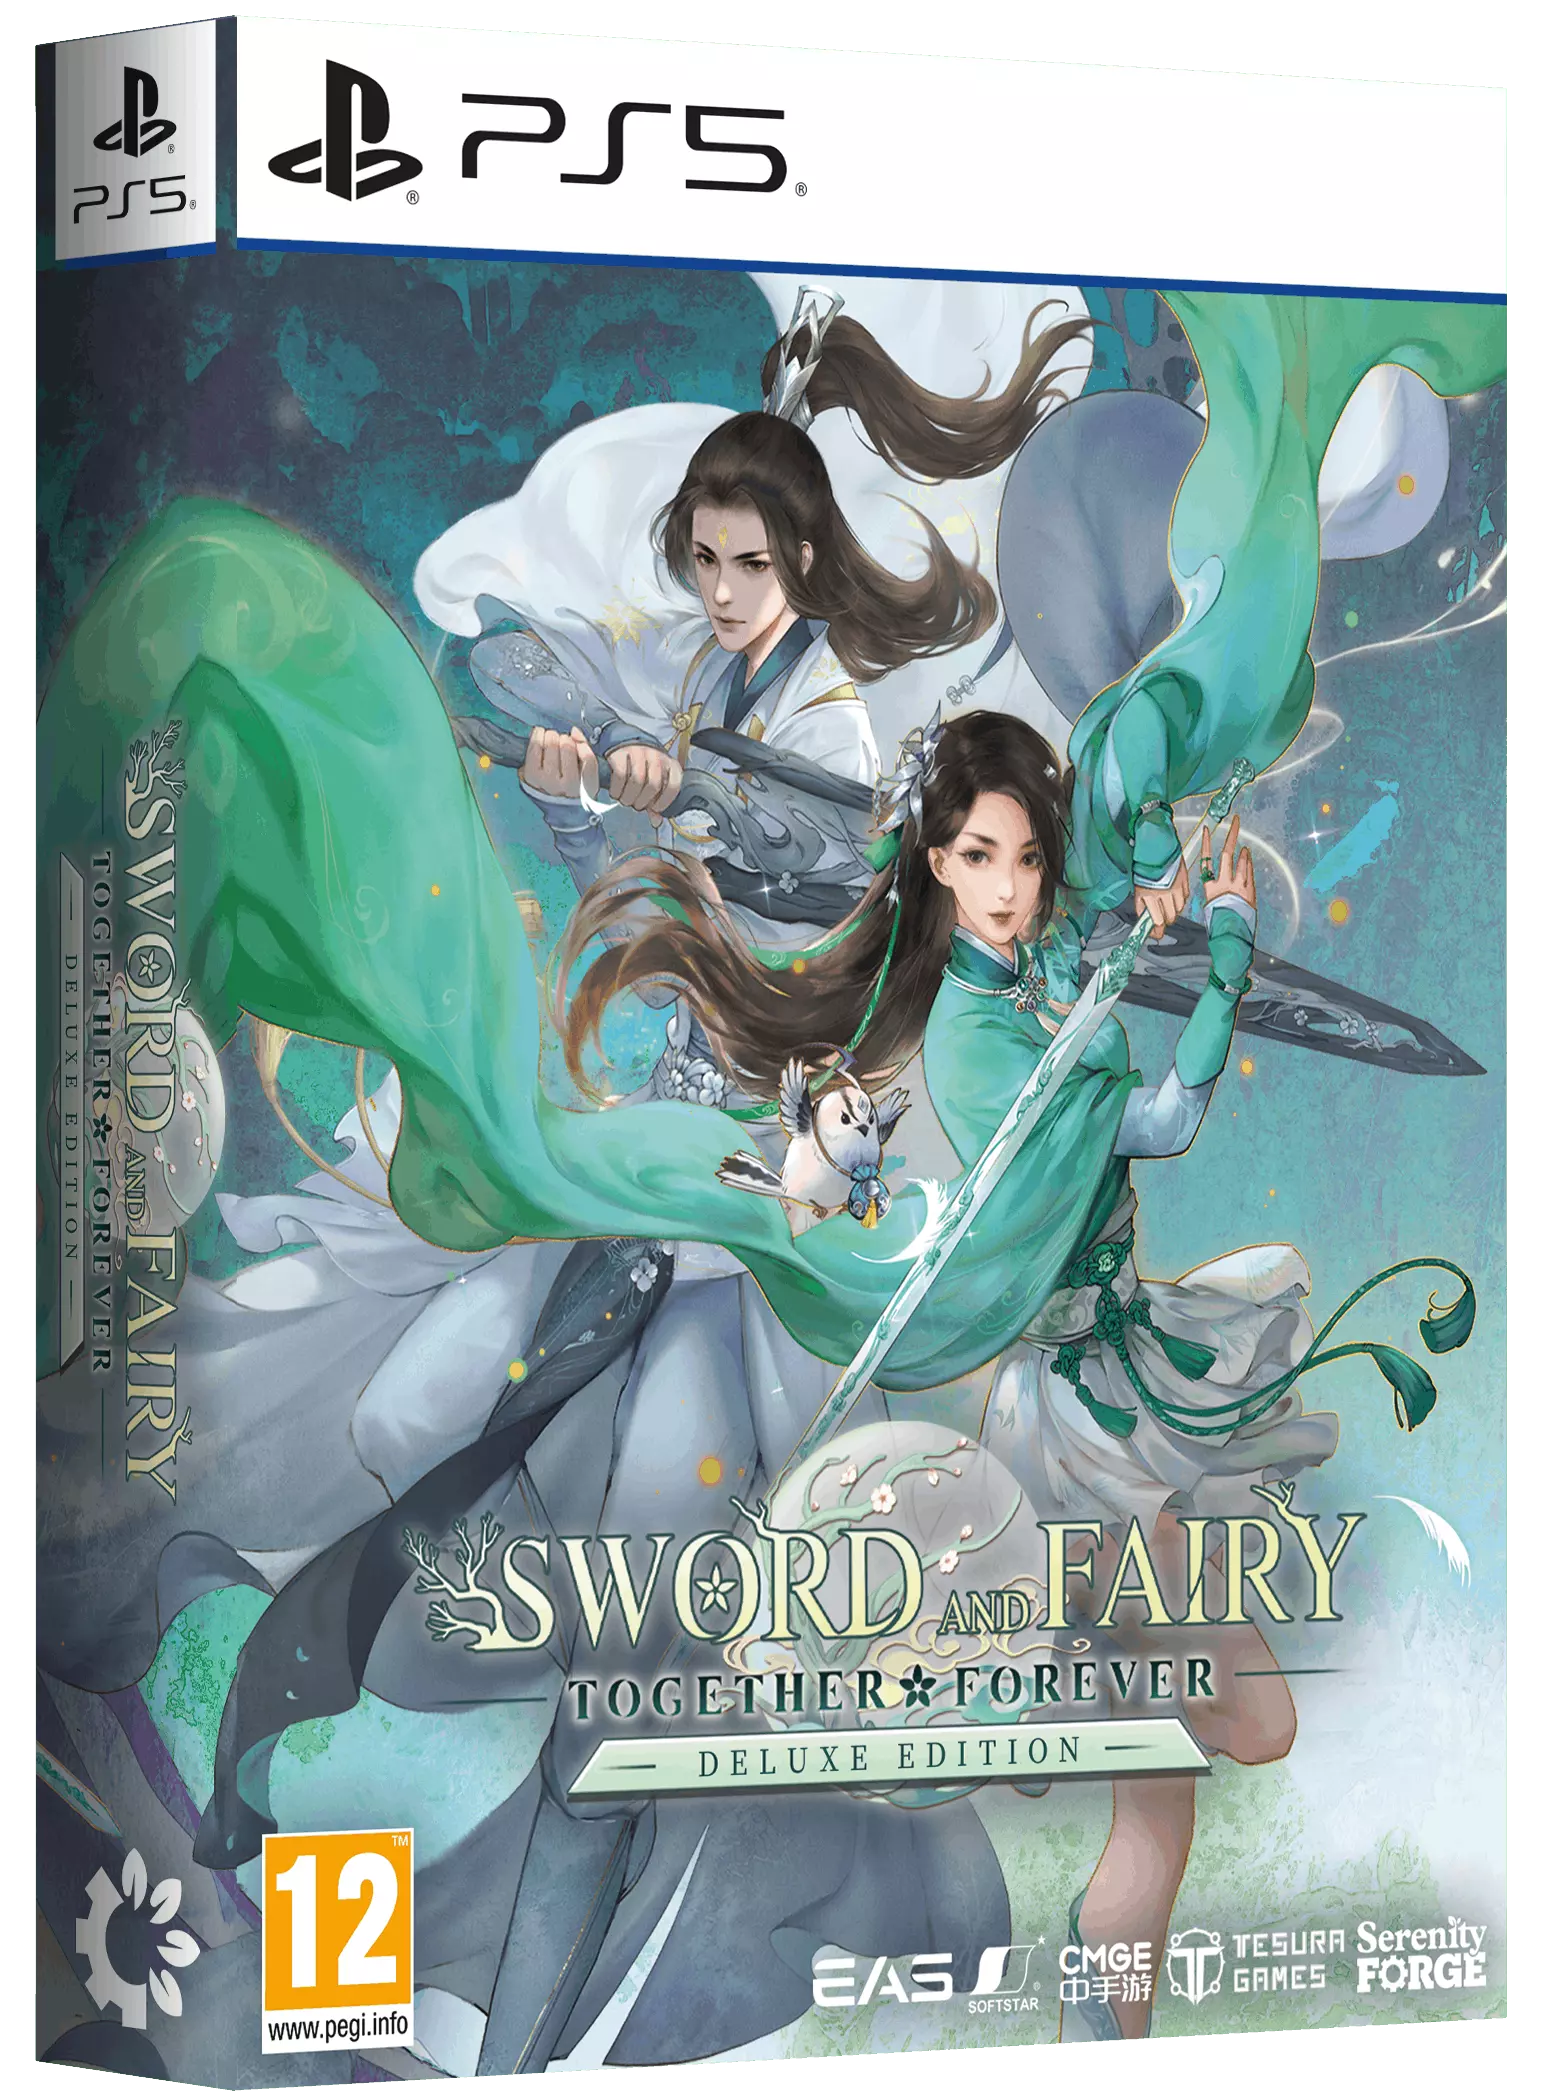 Sword And Fairy: Together Forever Deluxe